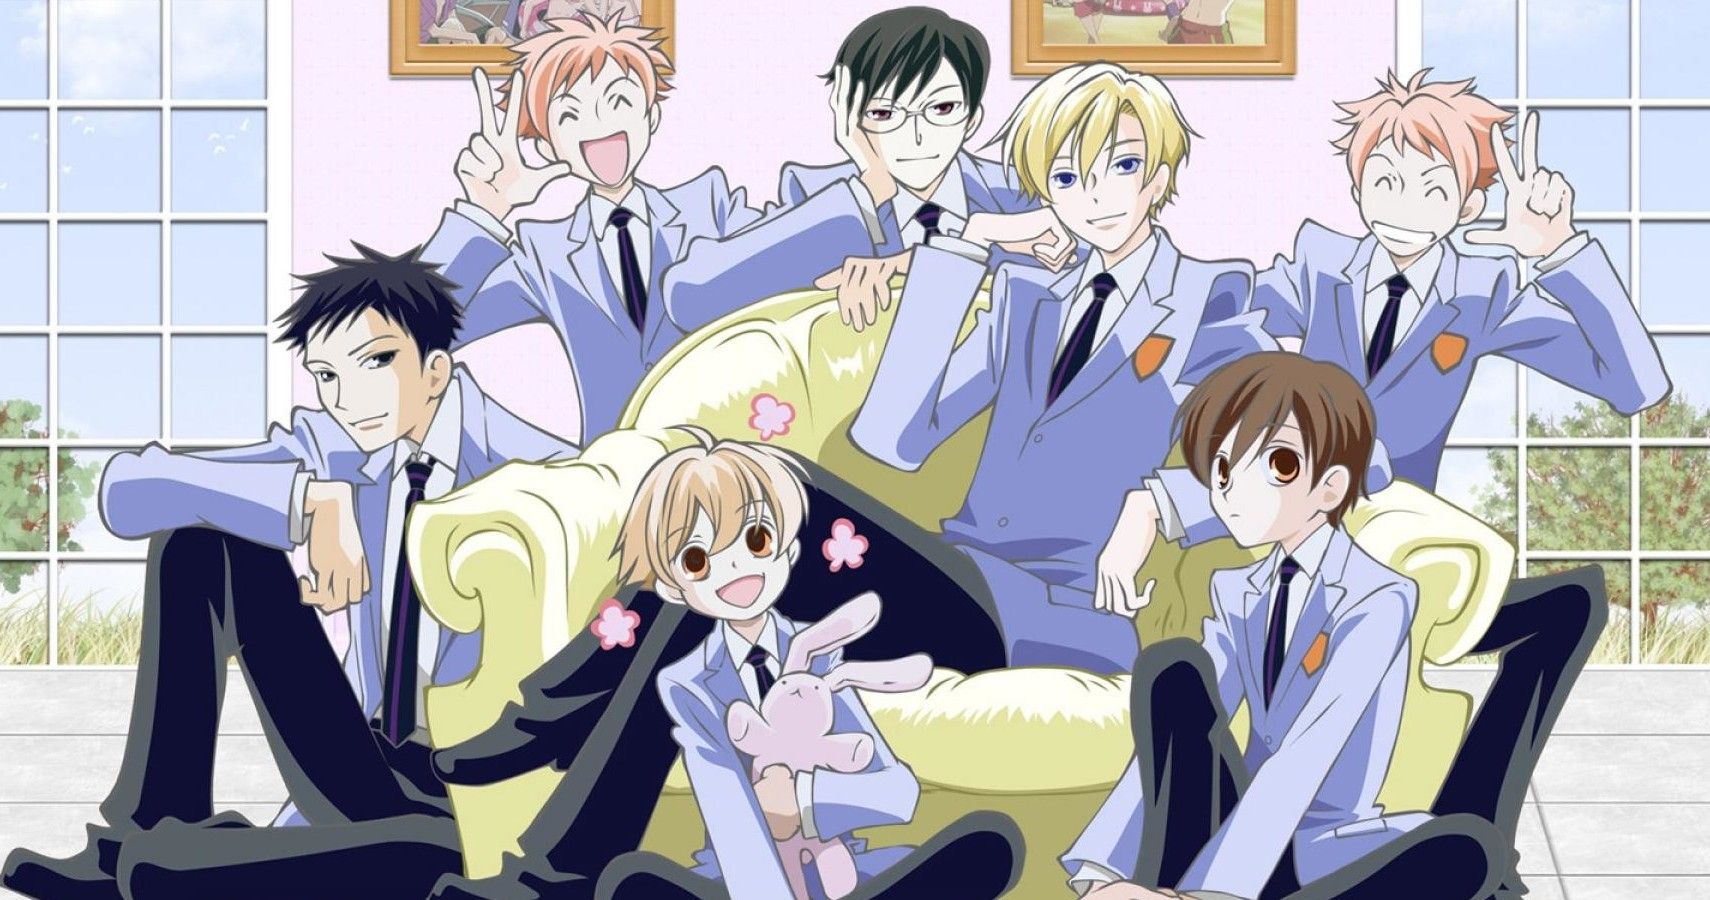 Ouran High School Host Club: 10 Hidden Details About The Main Characters